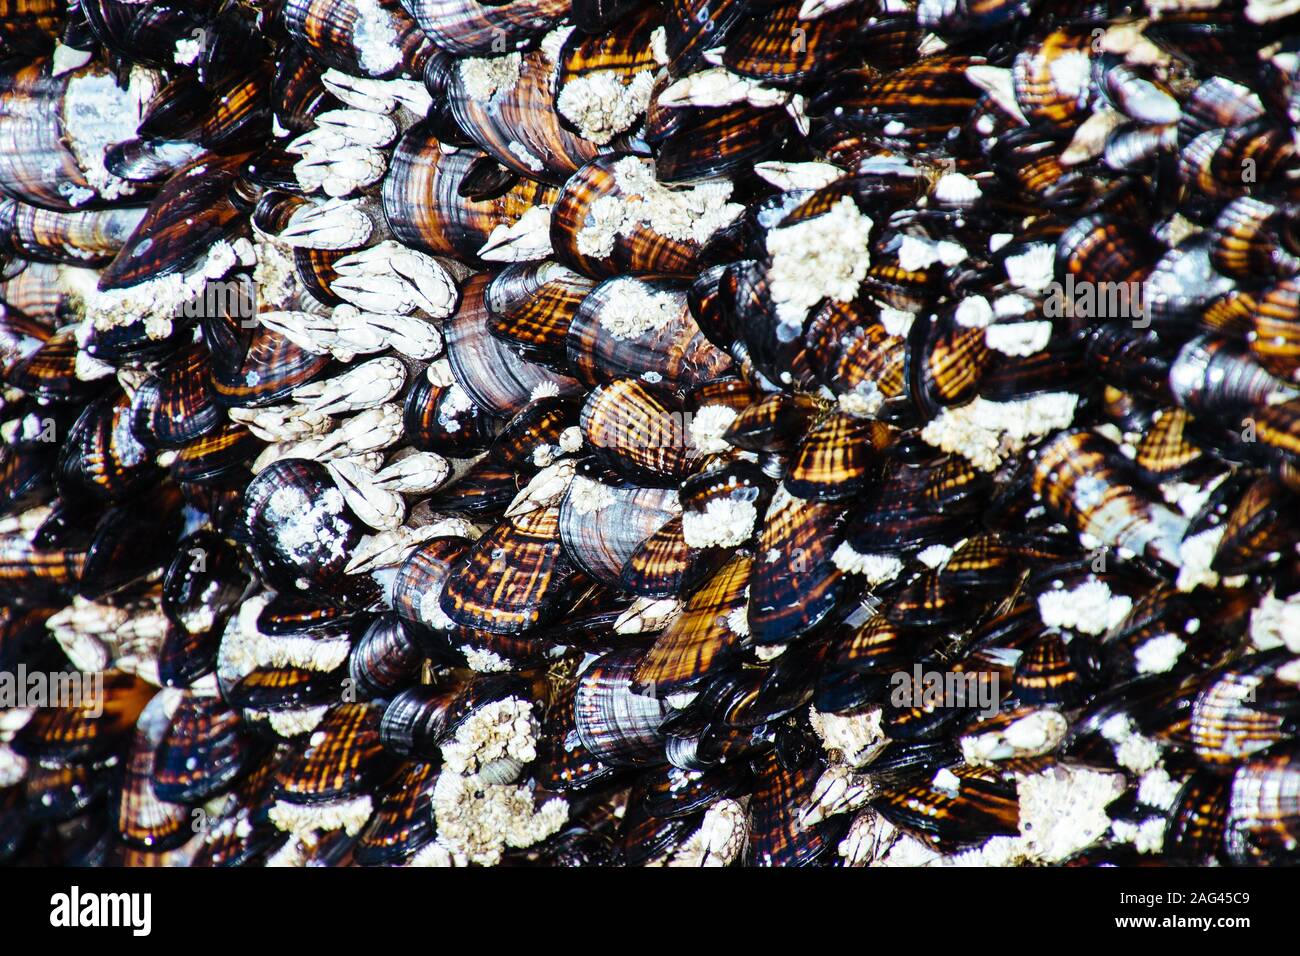 Closeup shot of Baltic Macoma clams gathered in one place Stock Photo